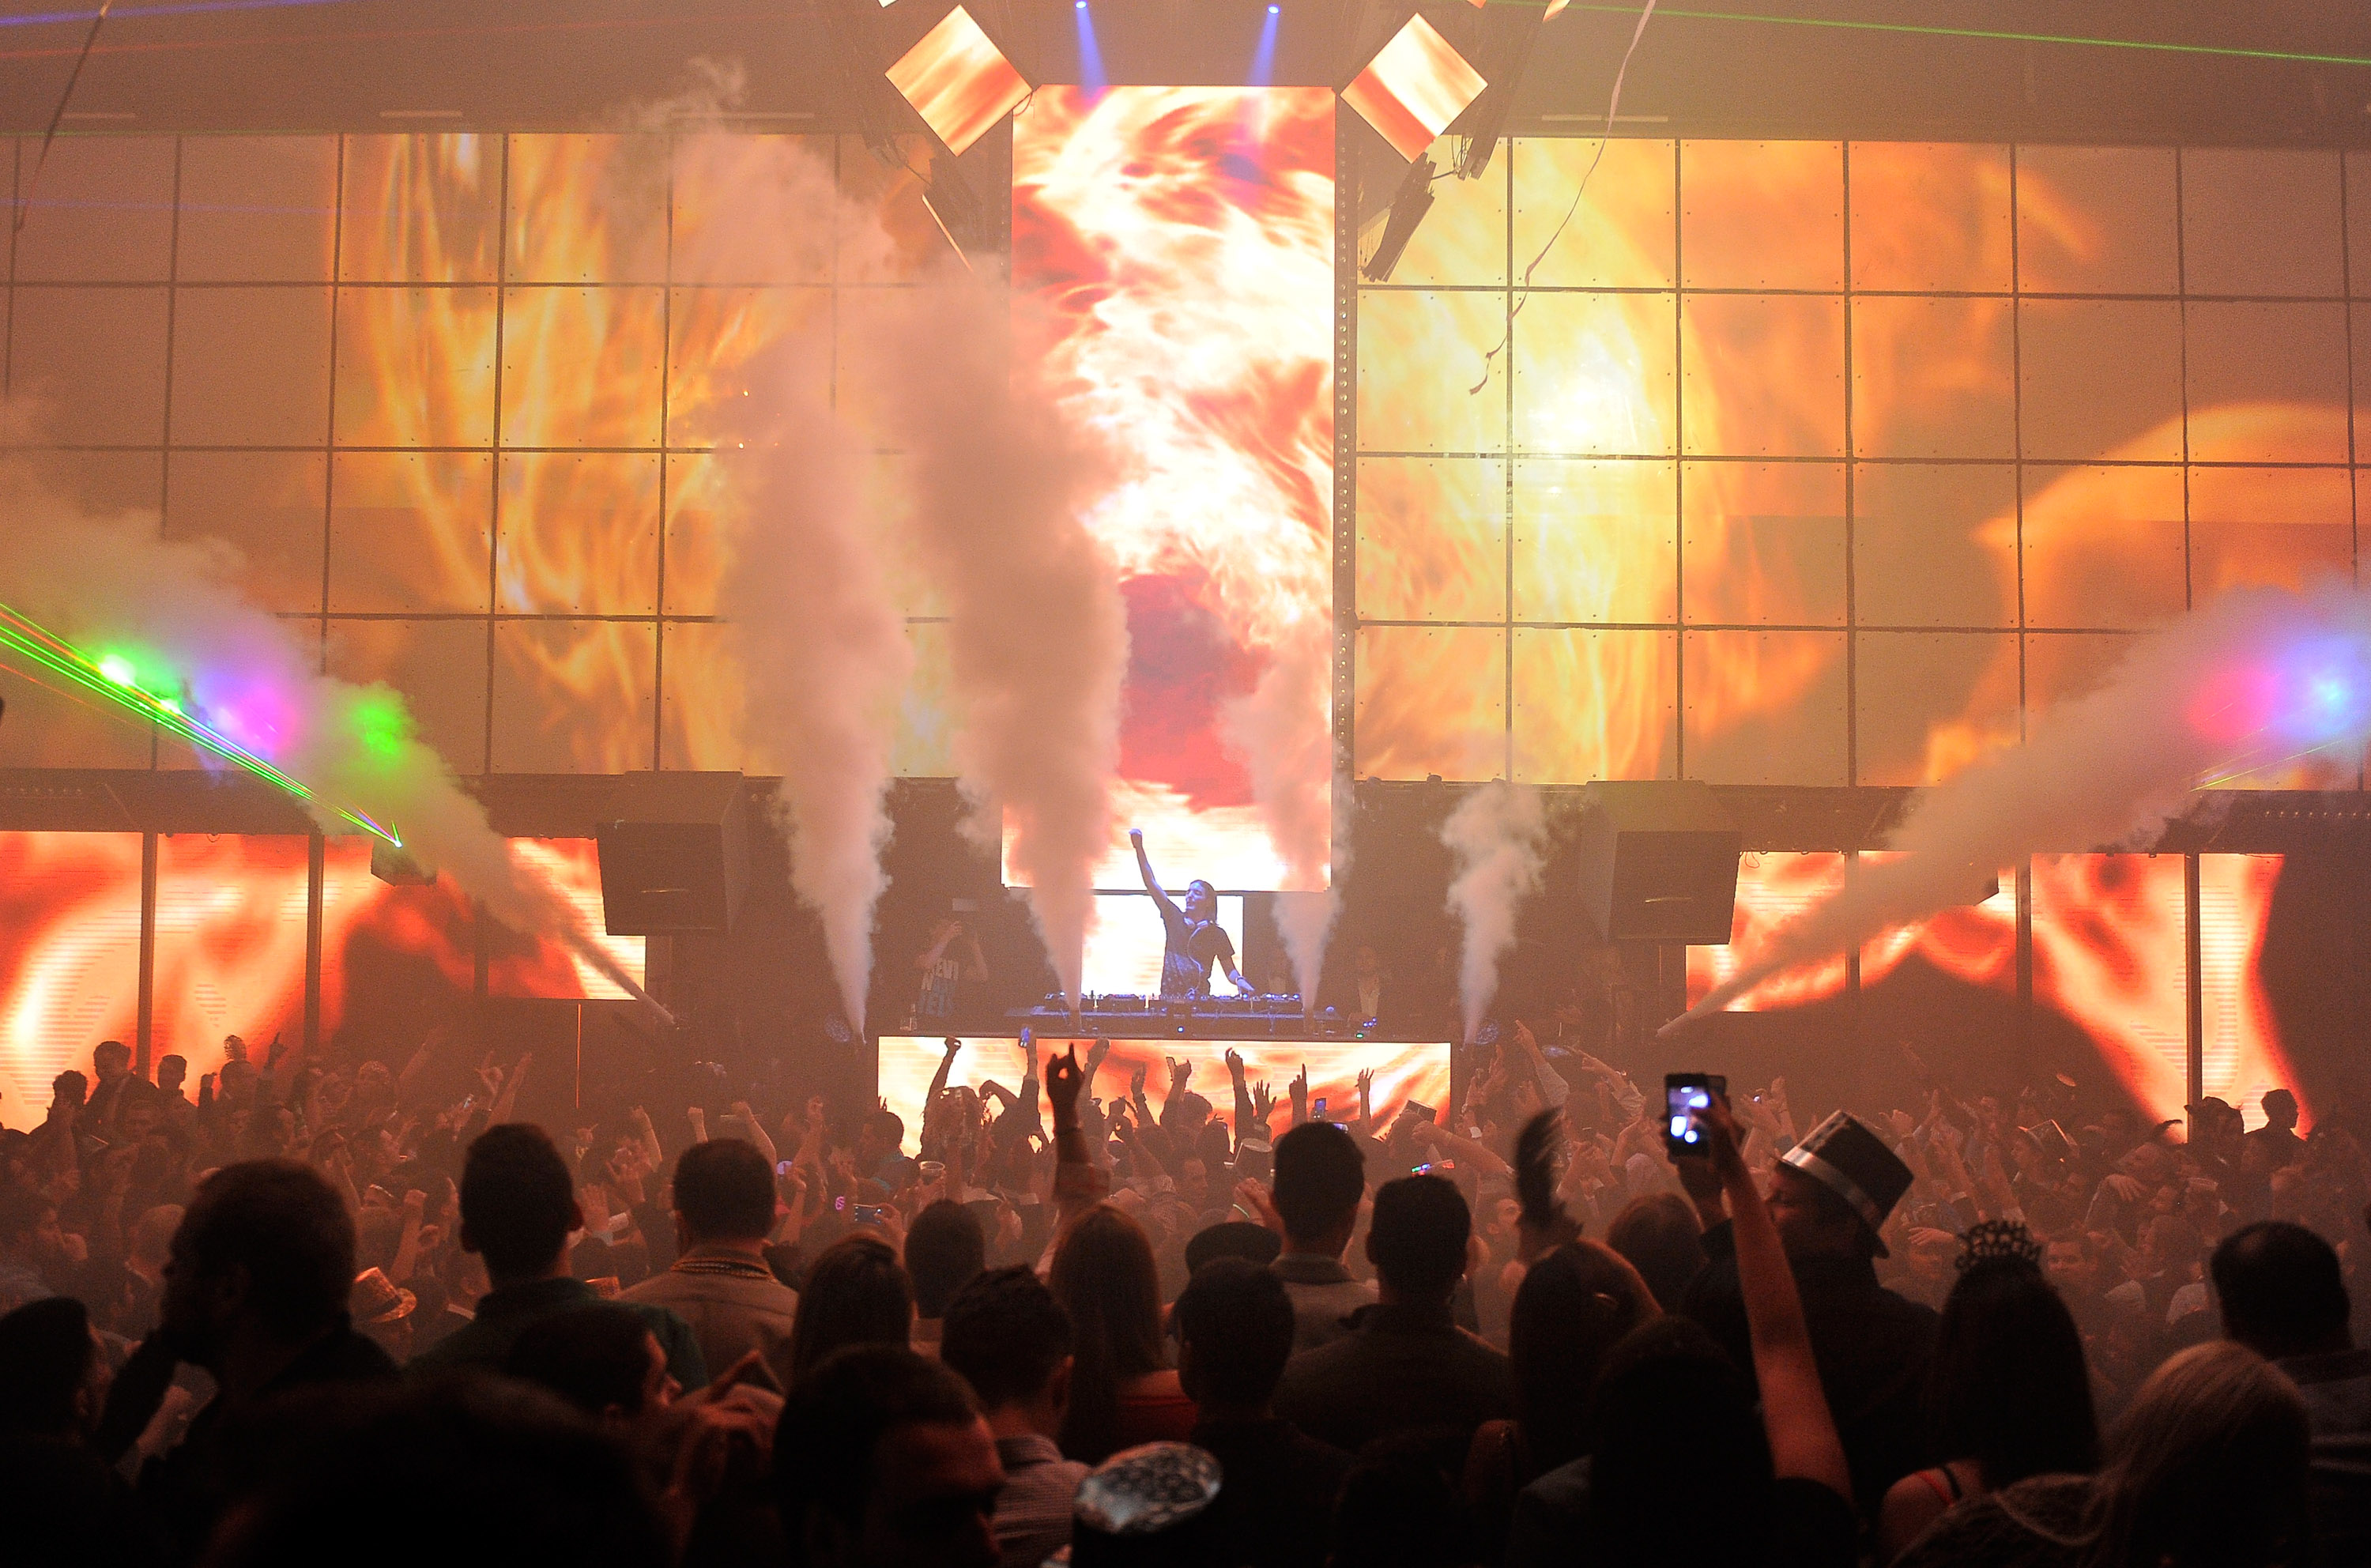 Alesso Rings In The New Year At Light Nightclub Inside Mandalay Bay